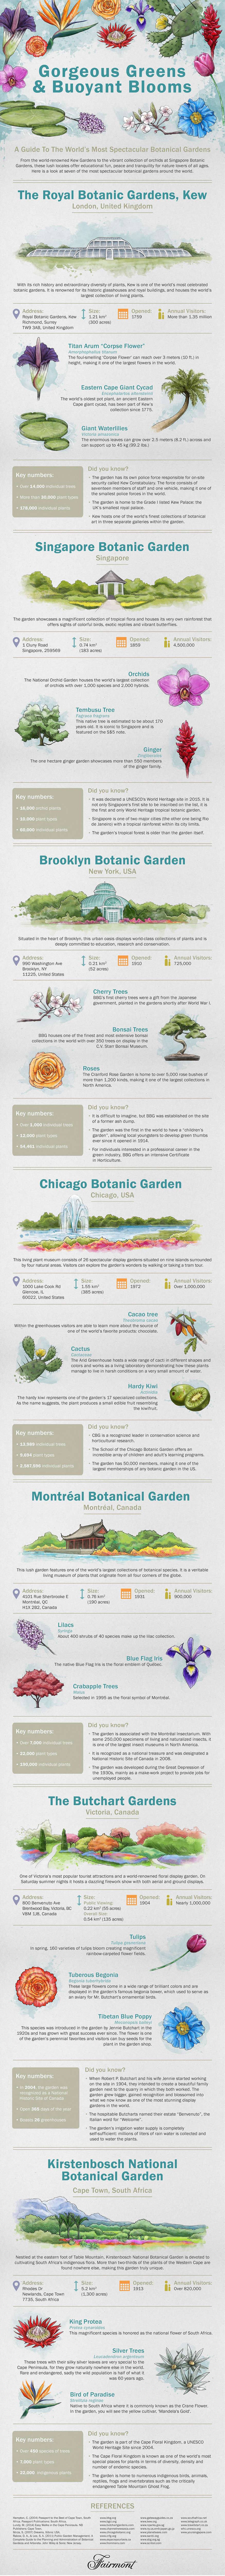 Discover some of the world's most beautiful botanical gardens with this useful infographic.